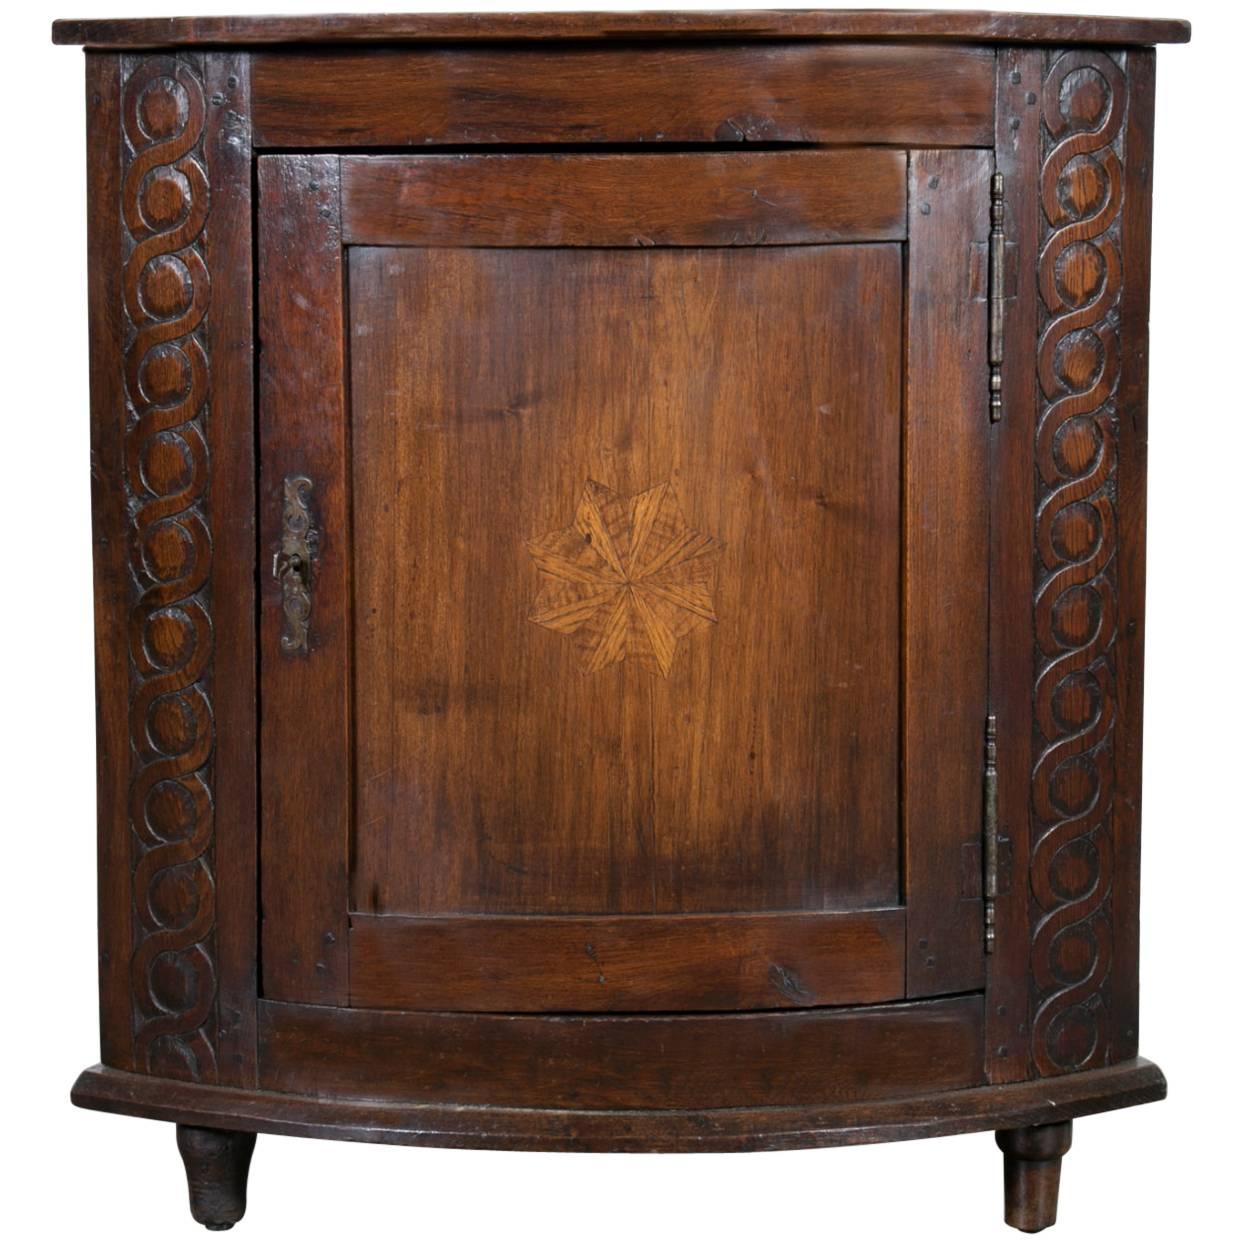 18th Century Country French Encoignure or Corner Cabinet